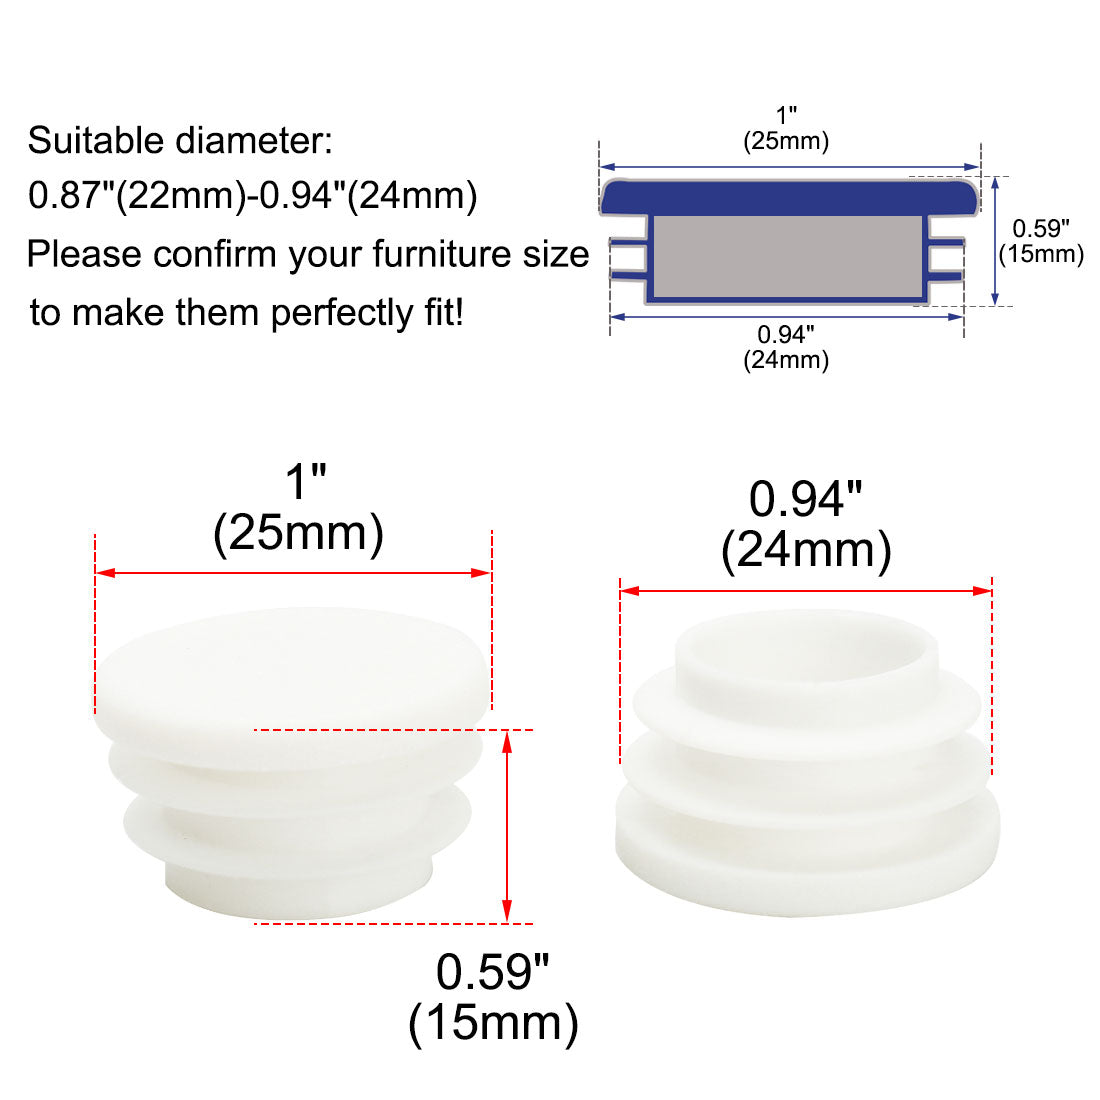 Uxcell Uxcell 1" 25mm OD Plastic Round Ribbed Tube Insert Pipe End Cover Cap White 24pcs, 0.87"-0.94" Inner Dia, Furniture Chair Table Feet Floor Protector